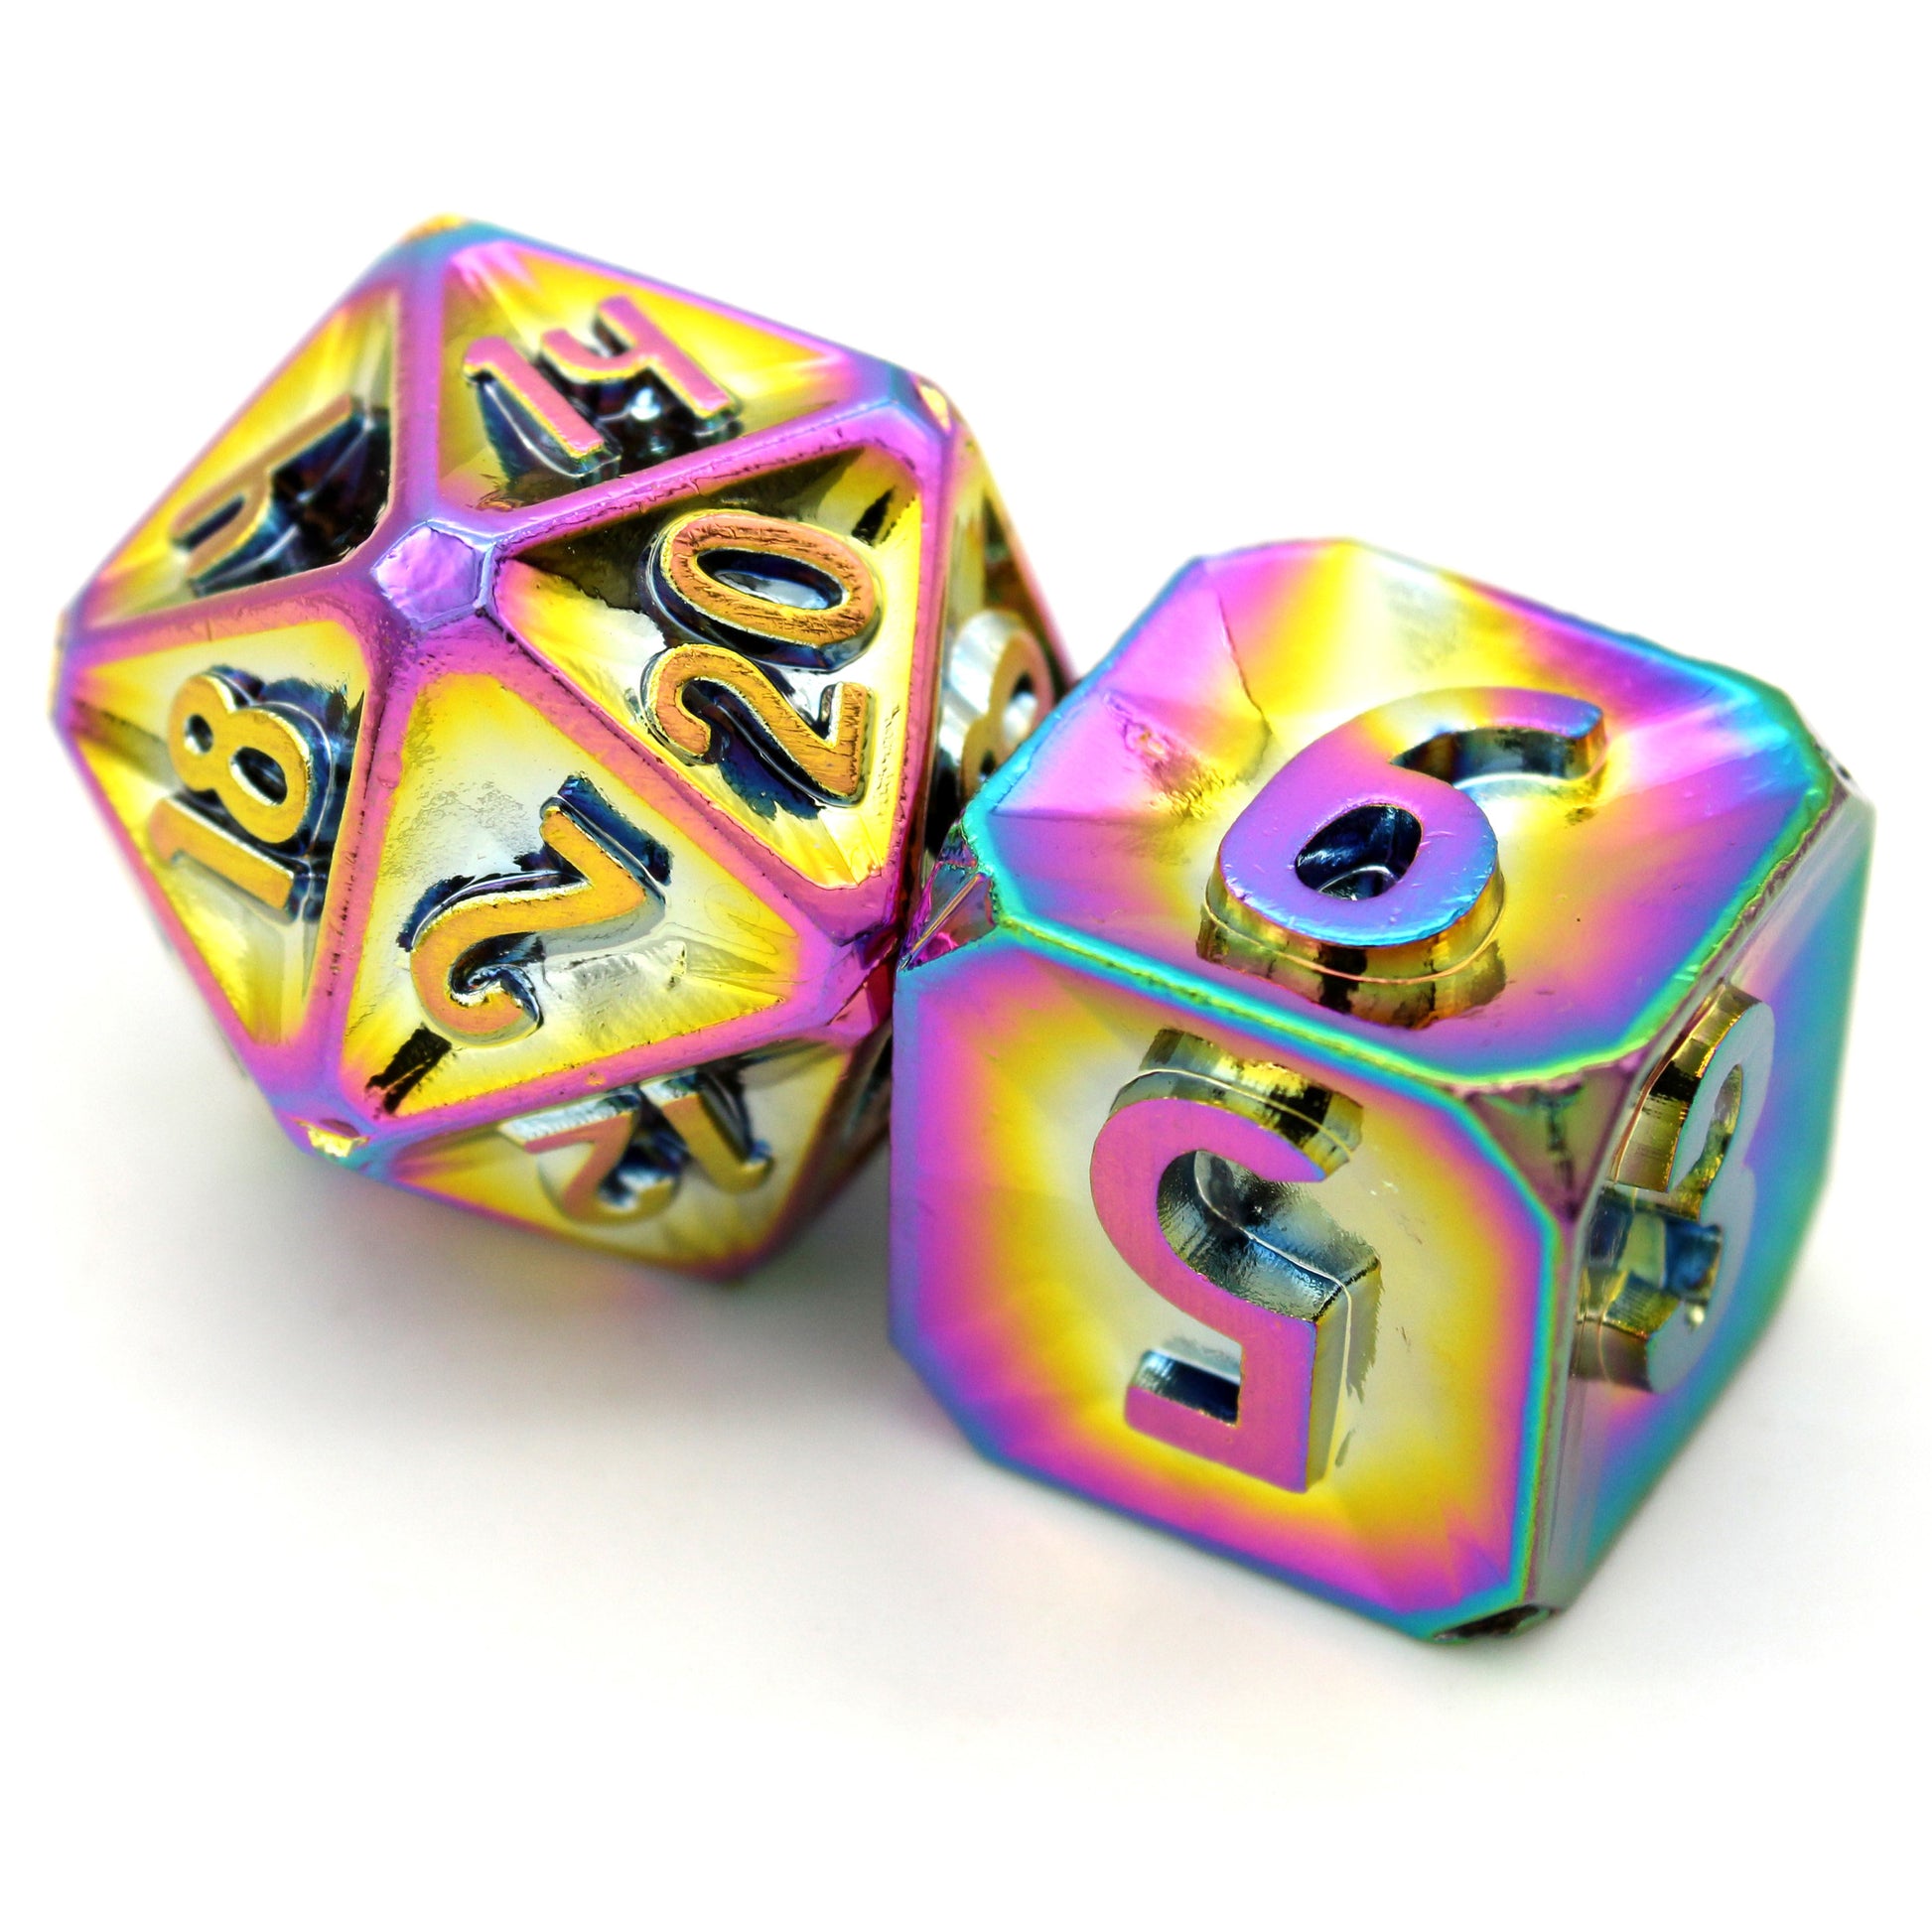 Oath of the Watchers is a Dice Envy Exclusive 8-piece set of zinc-alloy, concave, metal dice - neochrome in all the colors of the astral plane. It is part of the Oathbound collection.